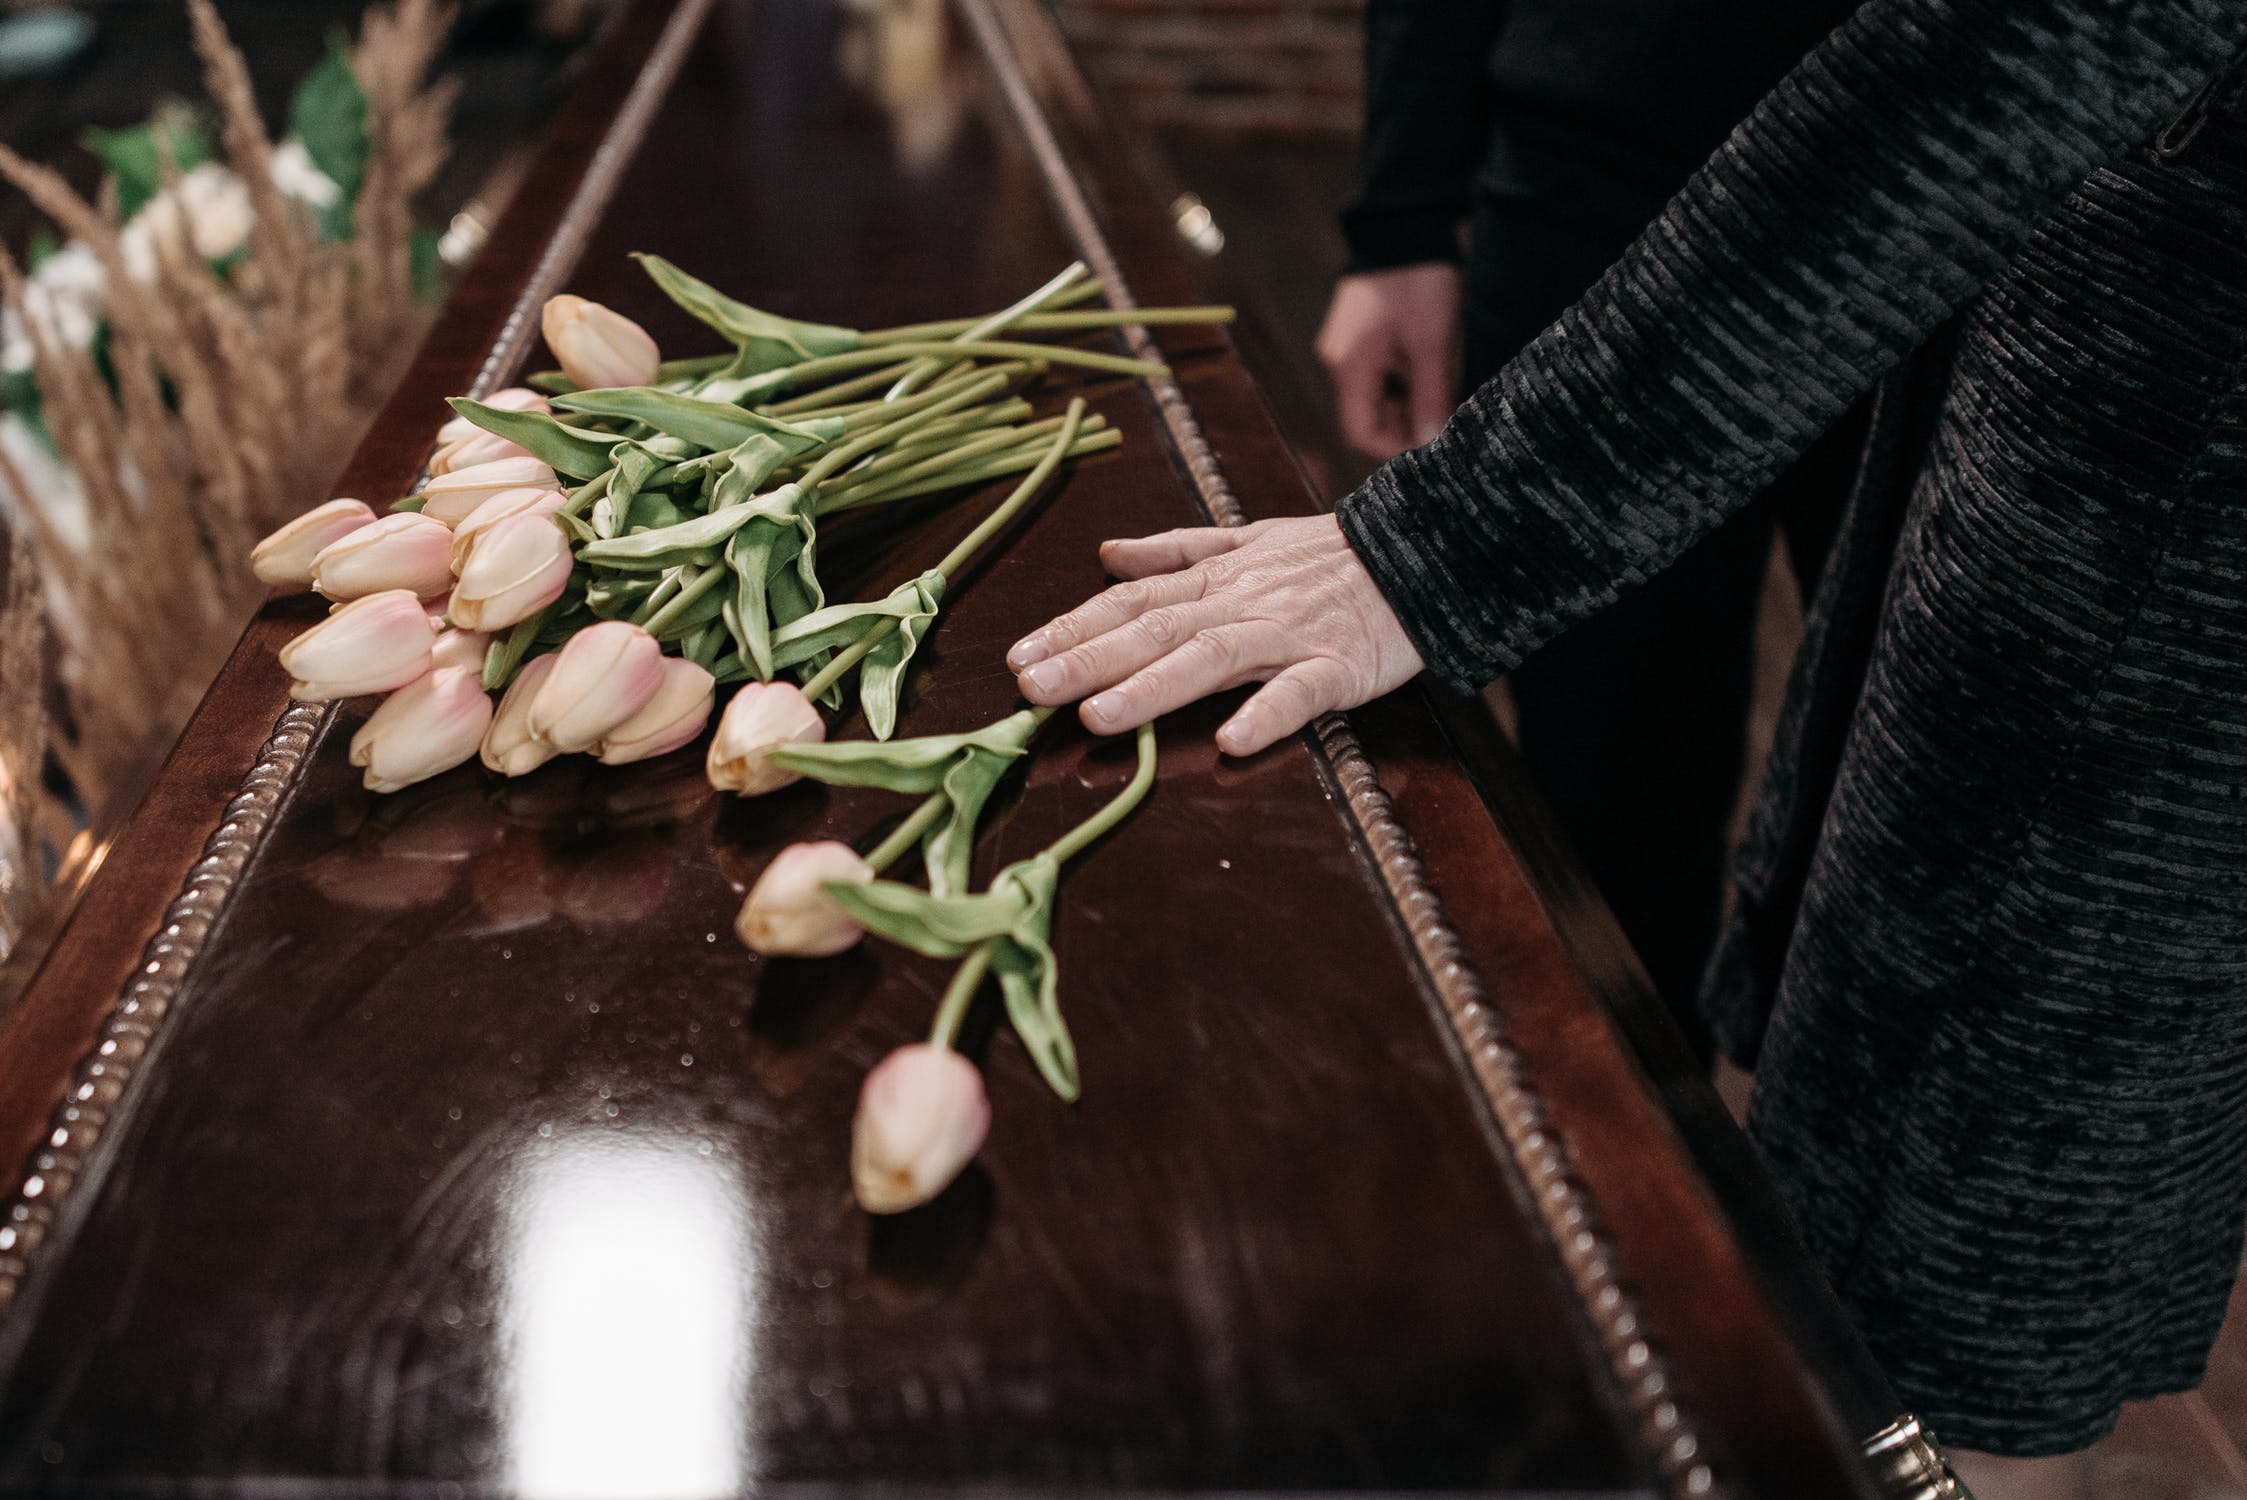 After the funeral, Marianne fell into a deep depression. | Source: Pexels